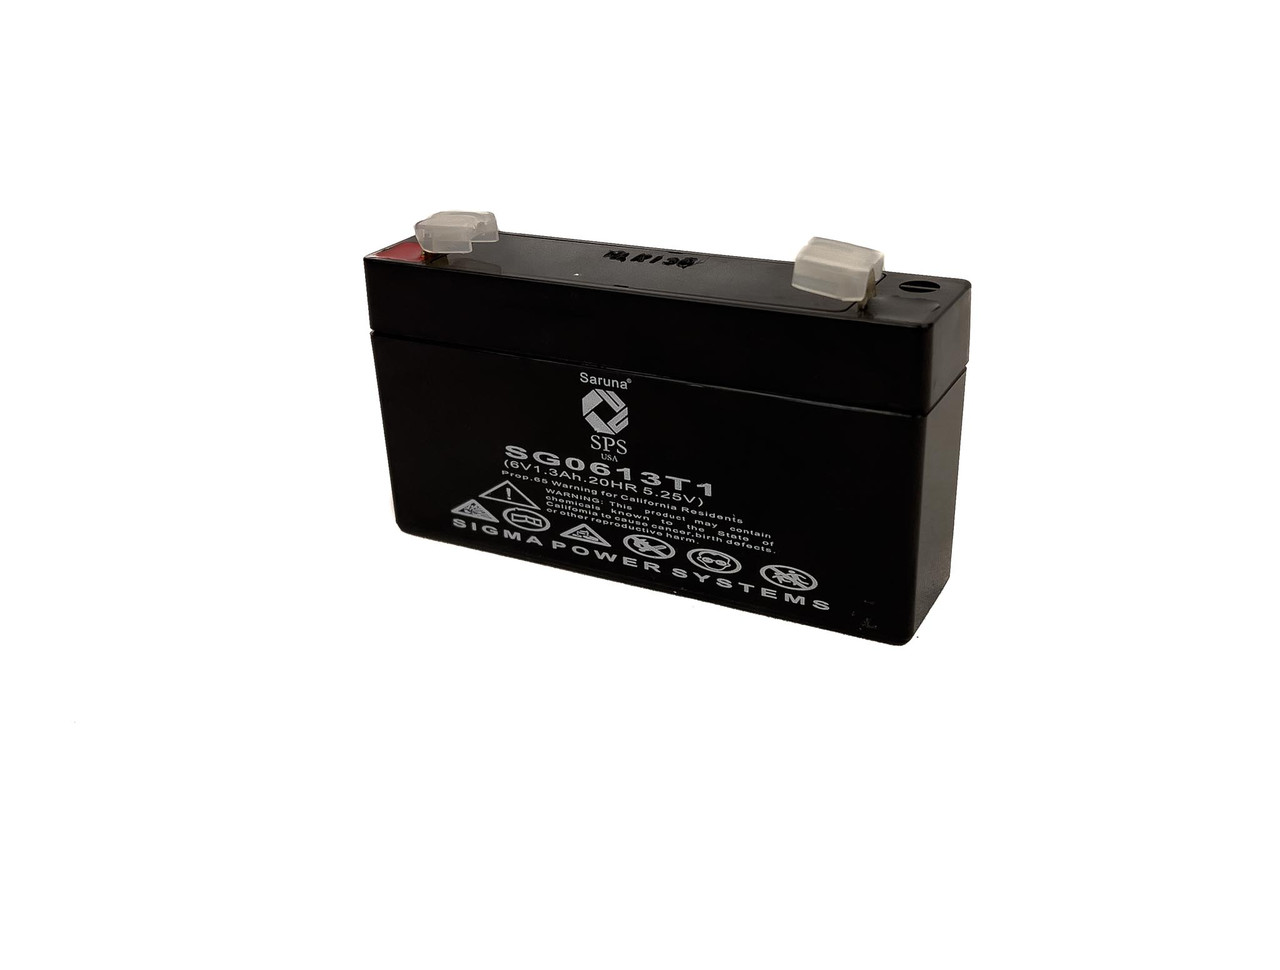 Raion Power 6V 1.3Ah Non-Spillable Replacement Battery for Ladd Steritak J7000 Inter Cranial Pressure